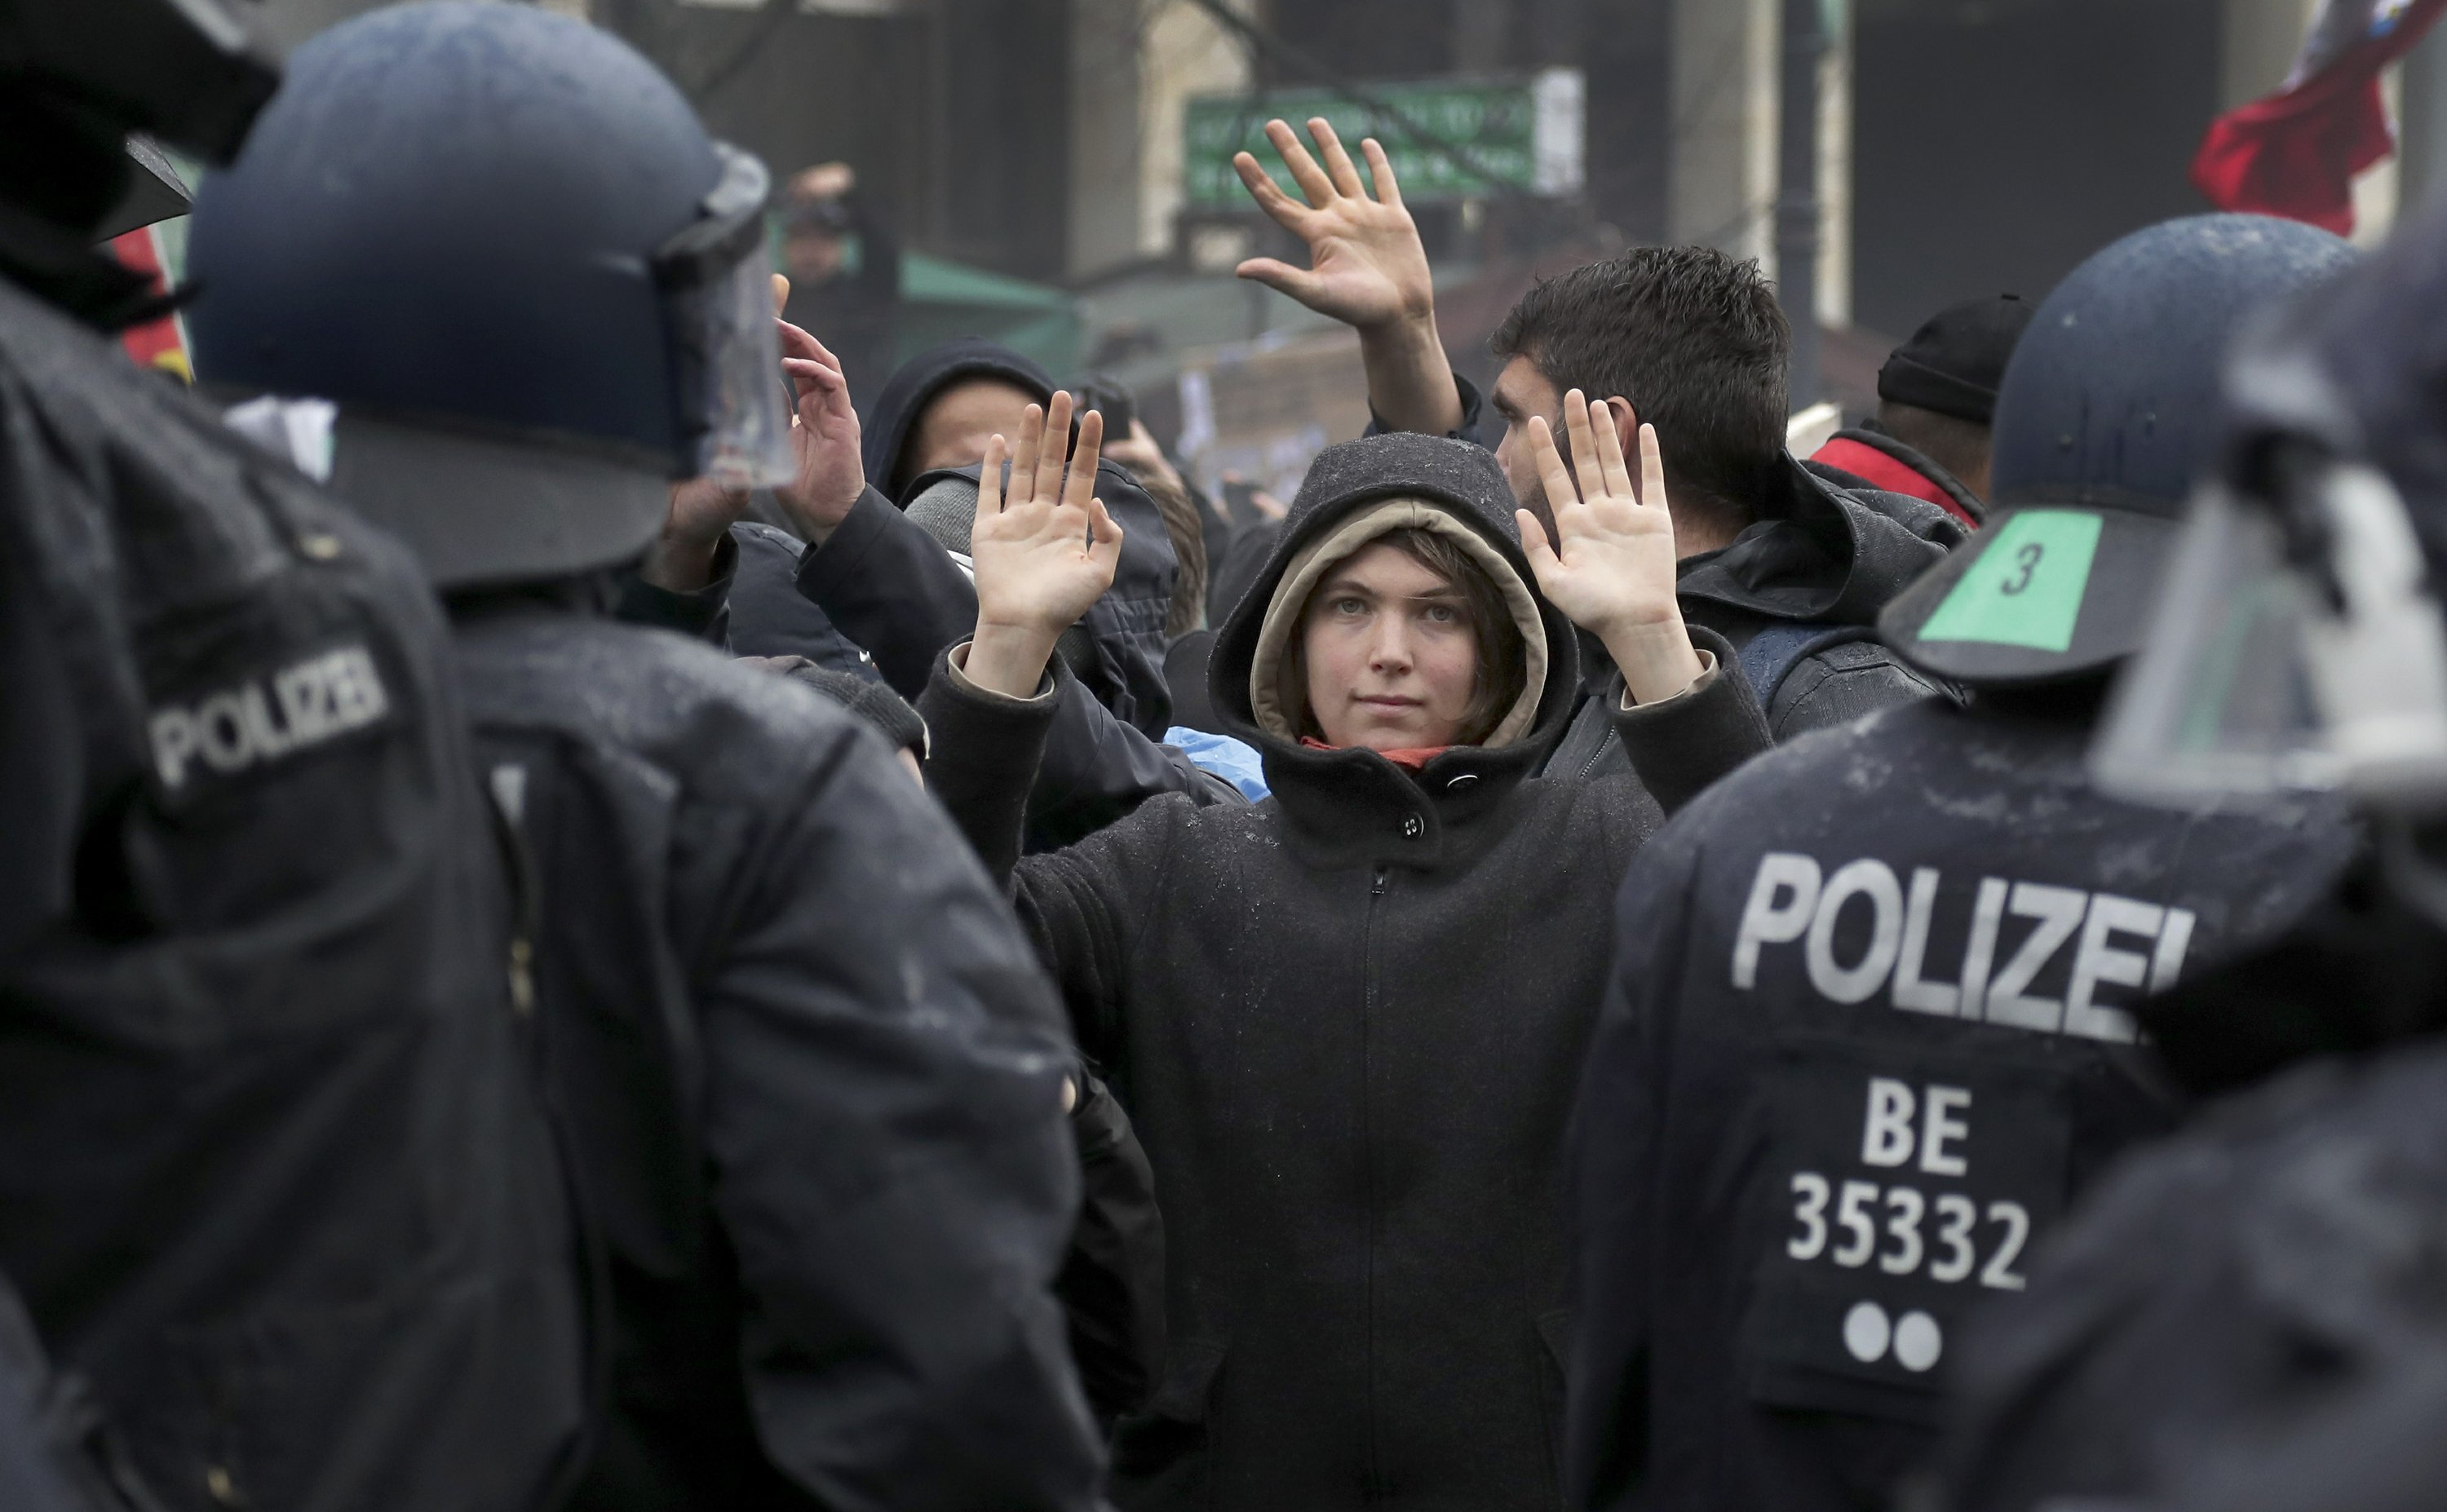 Berlin police forcefully disperse protest over virus rules